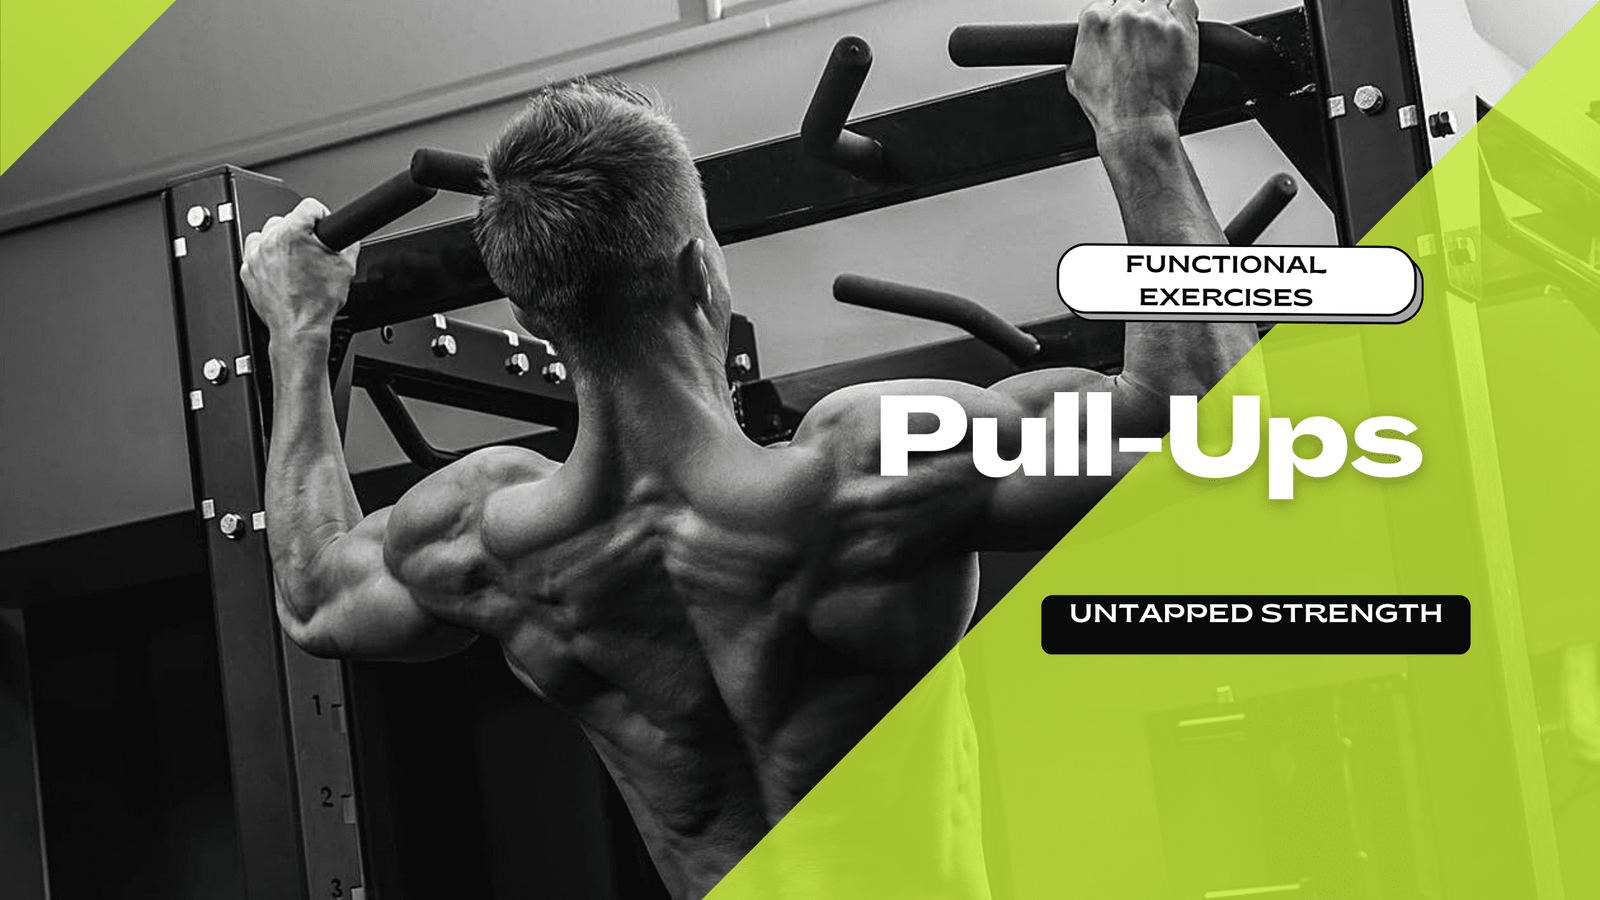 Pull-Ups is a Great Functional Exercises Untapped Strength